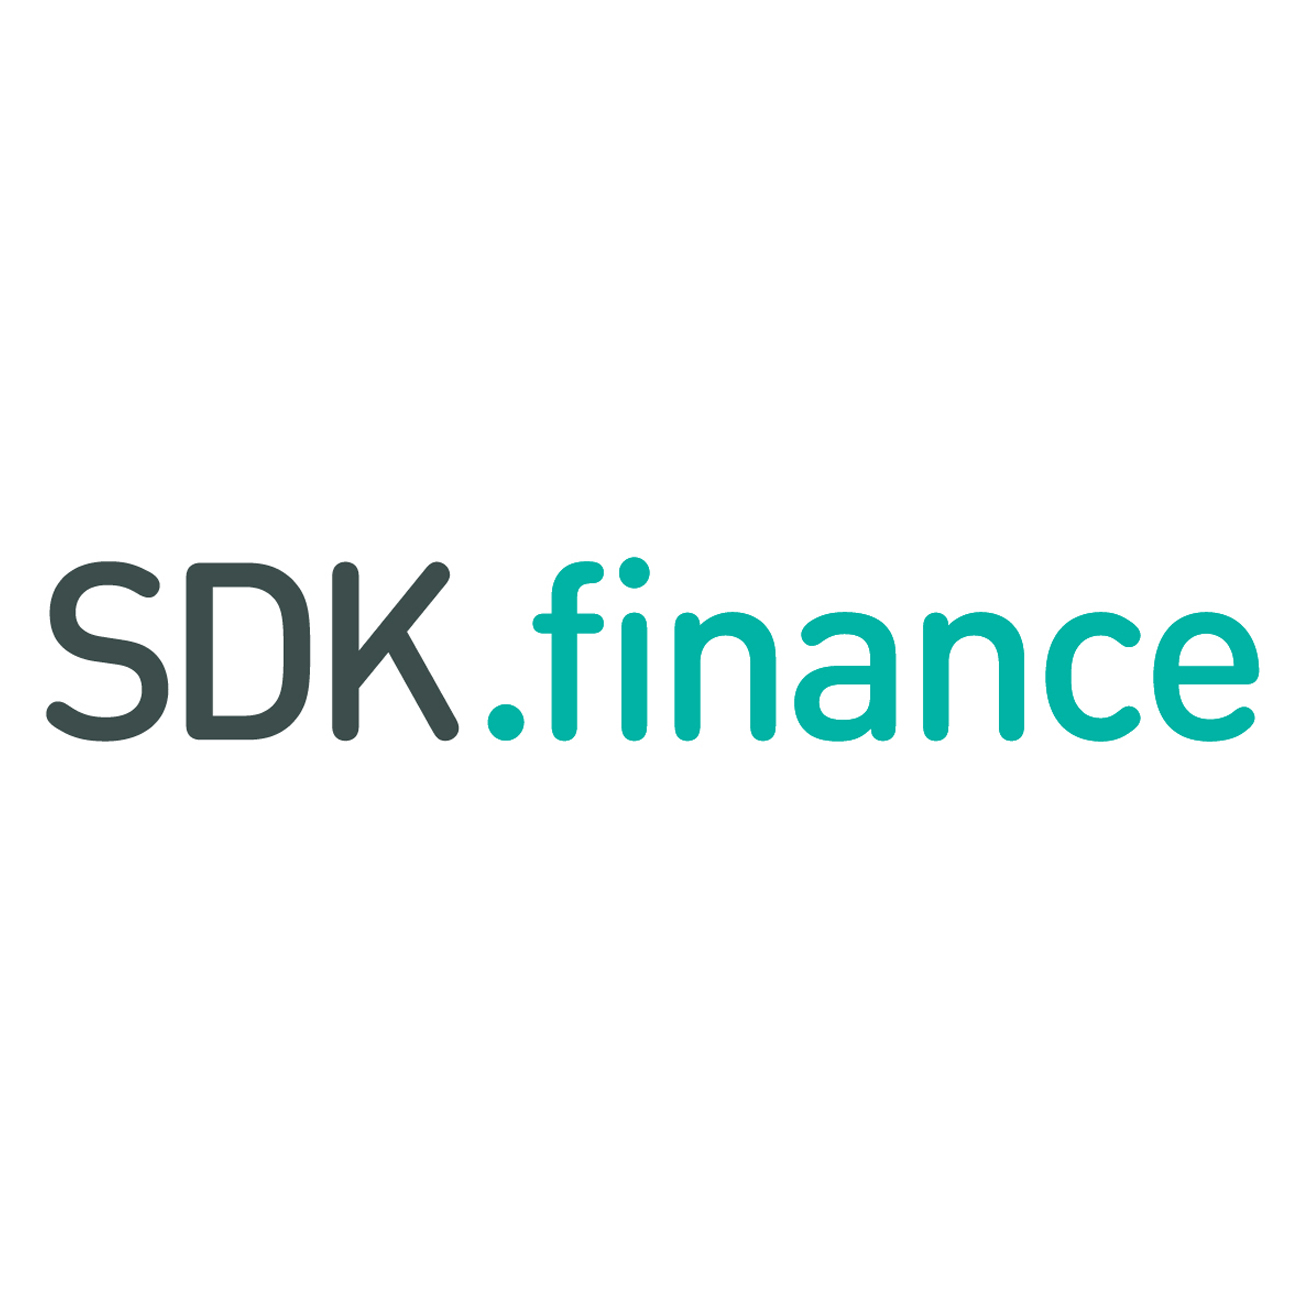 SDK.finance Commits Two Open Source Projects to GitHub